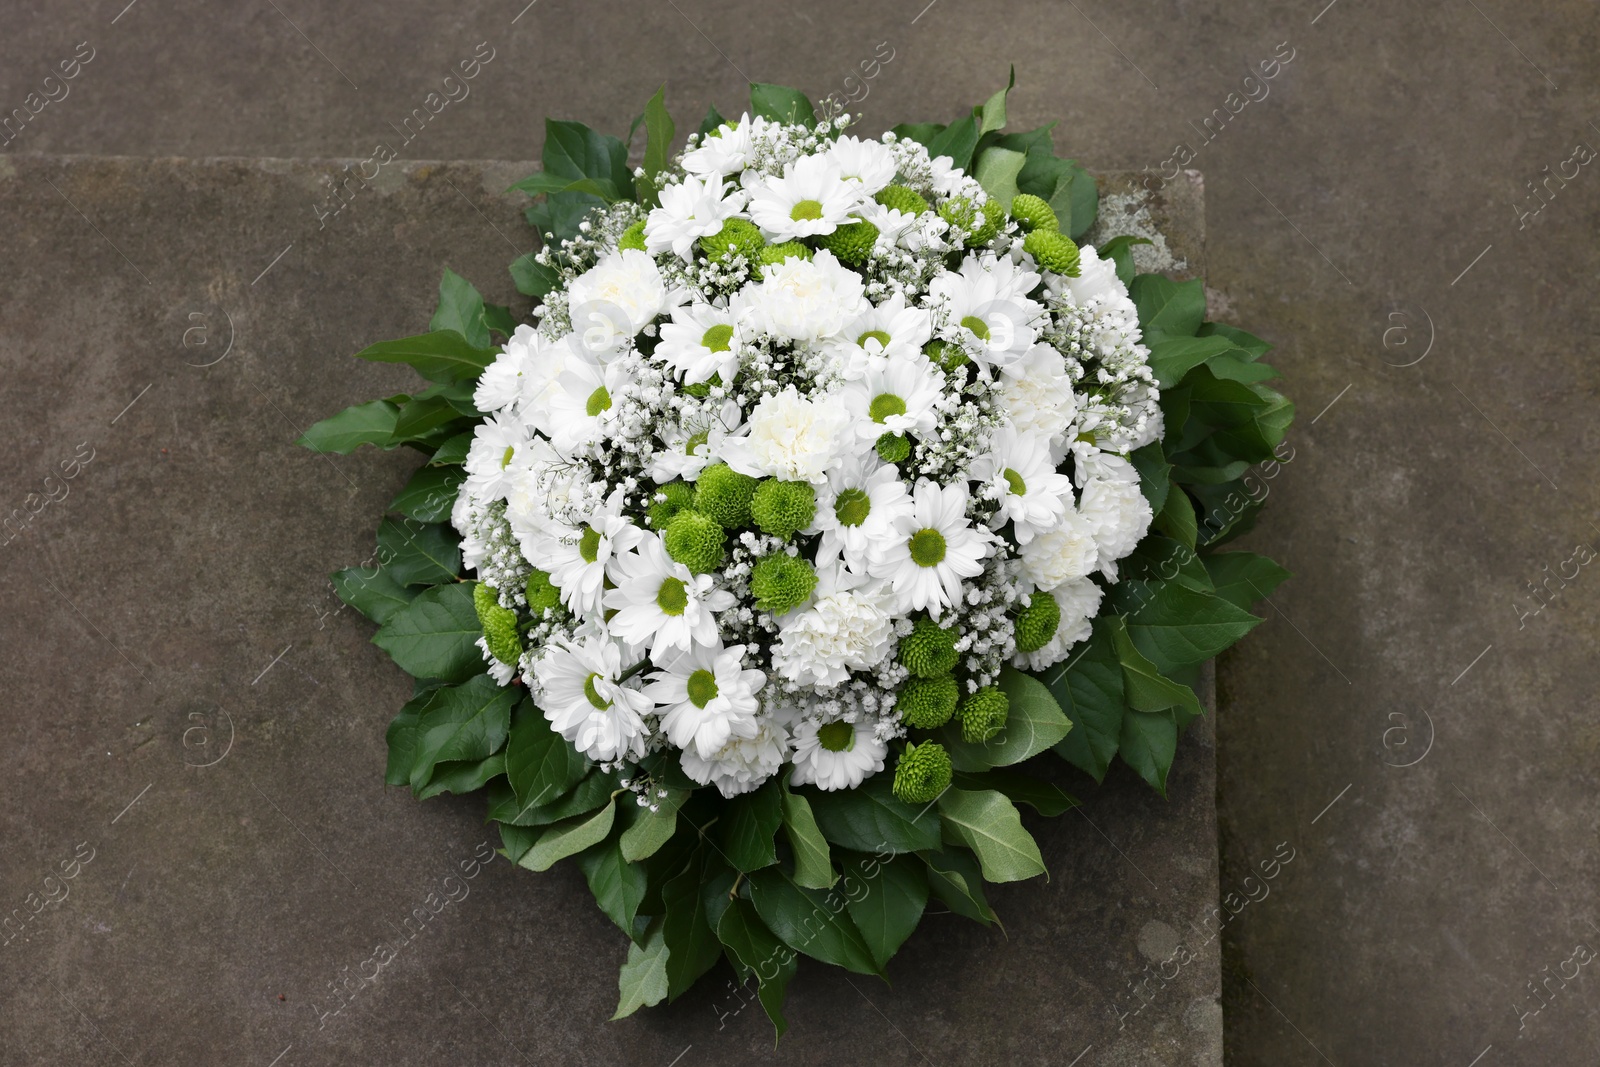 Photo of Funeral wreath of flowers on tombstone, above view